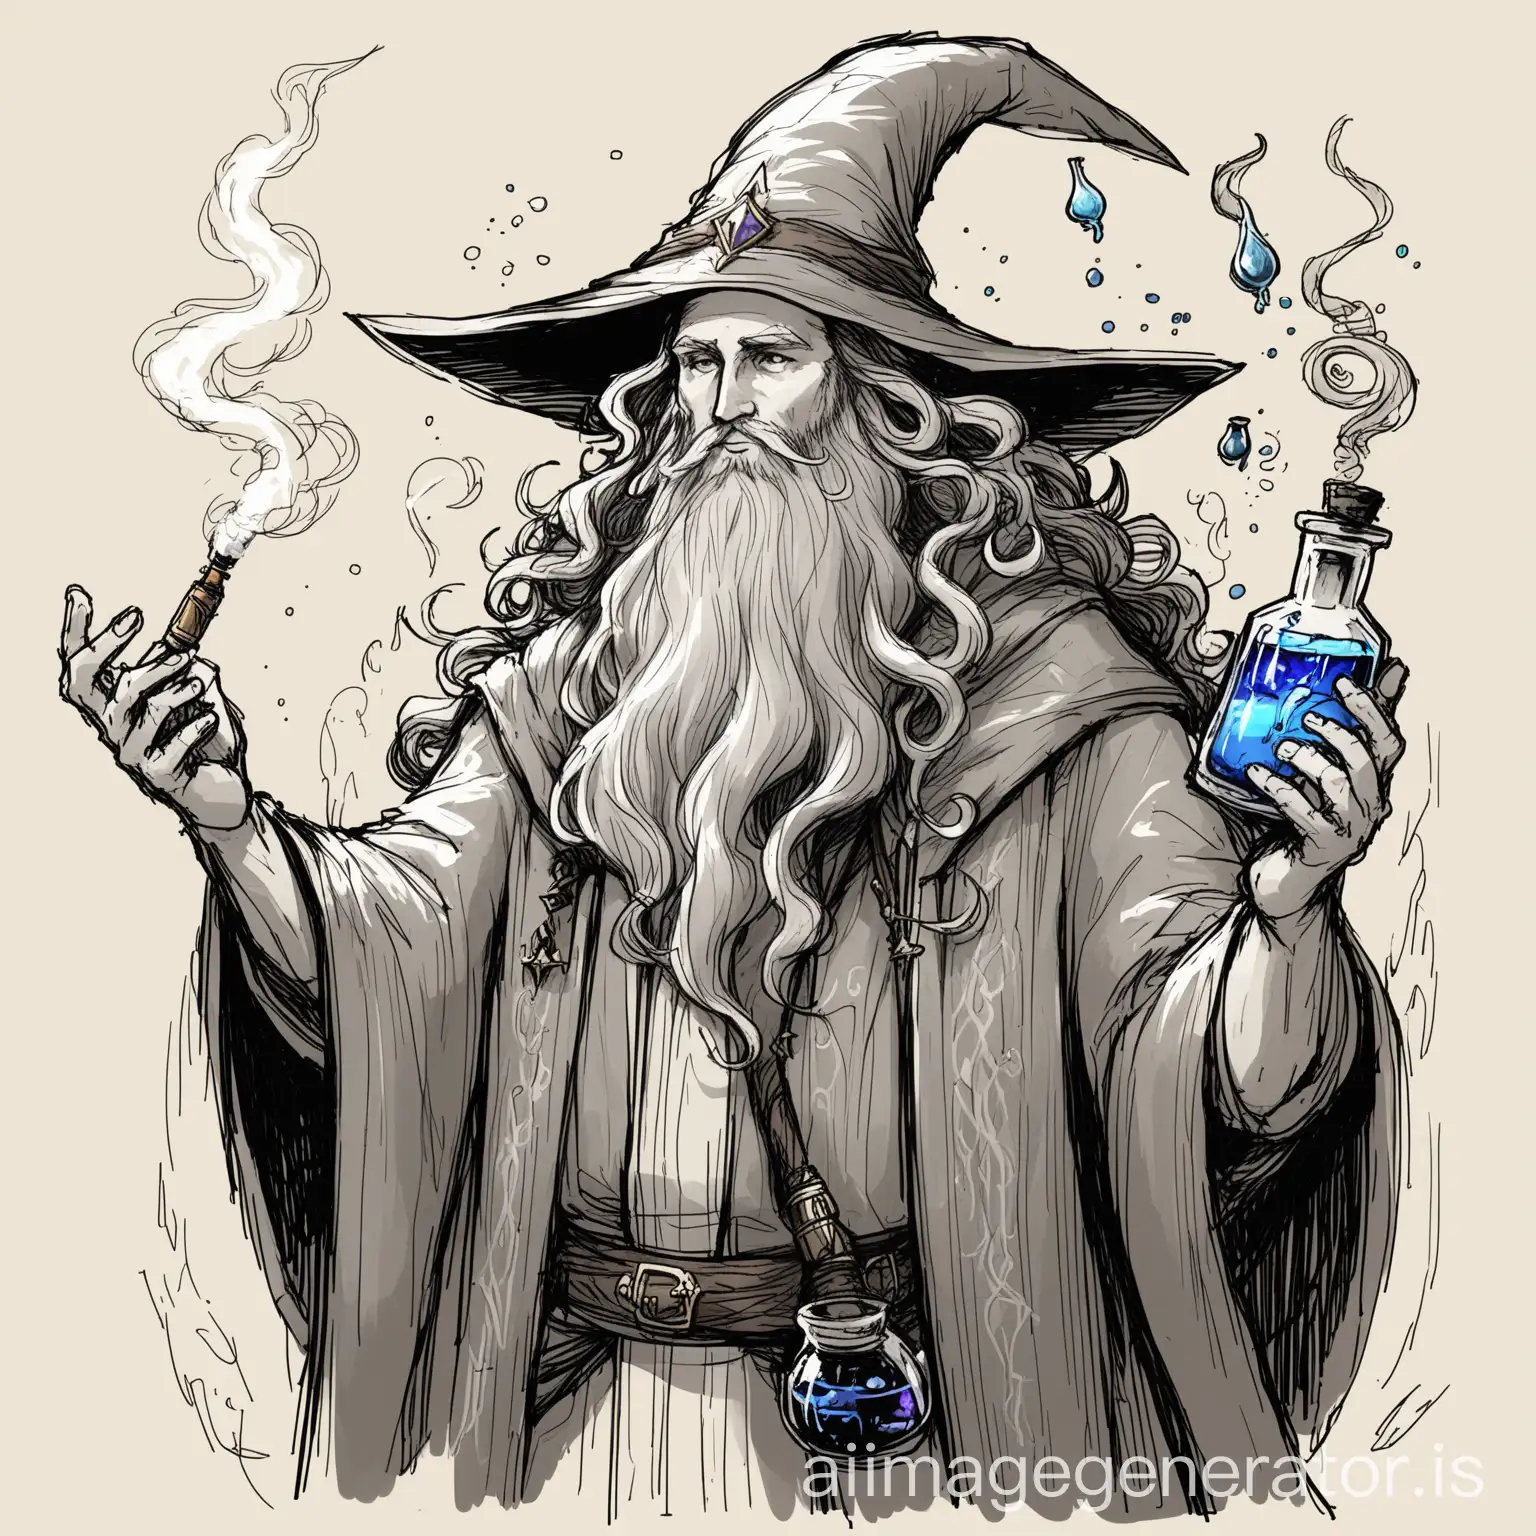 Sketch of a fantasy wizard with a long beard and short curly hair. He has potions around him and a vape in his hand